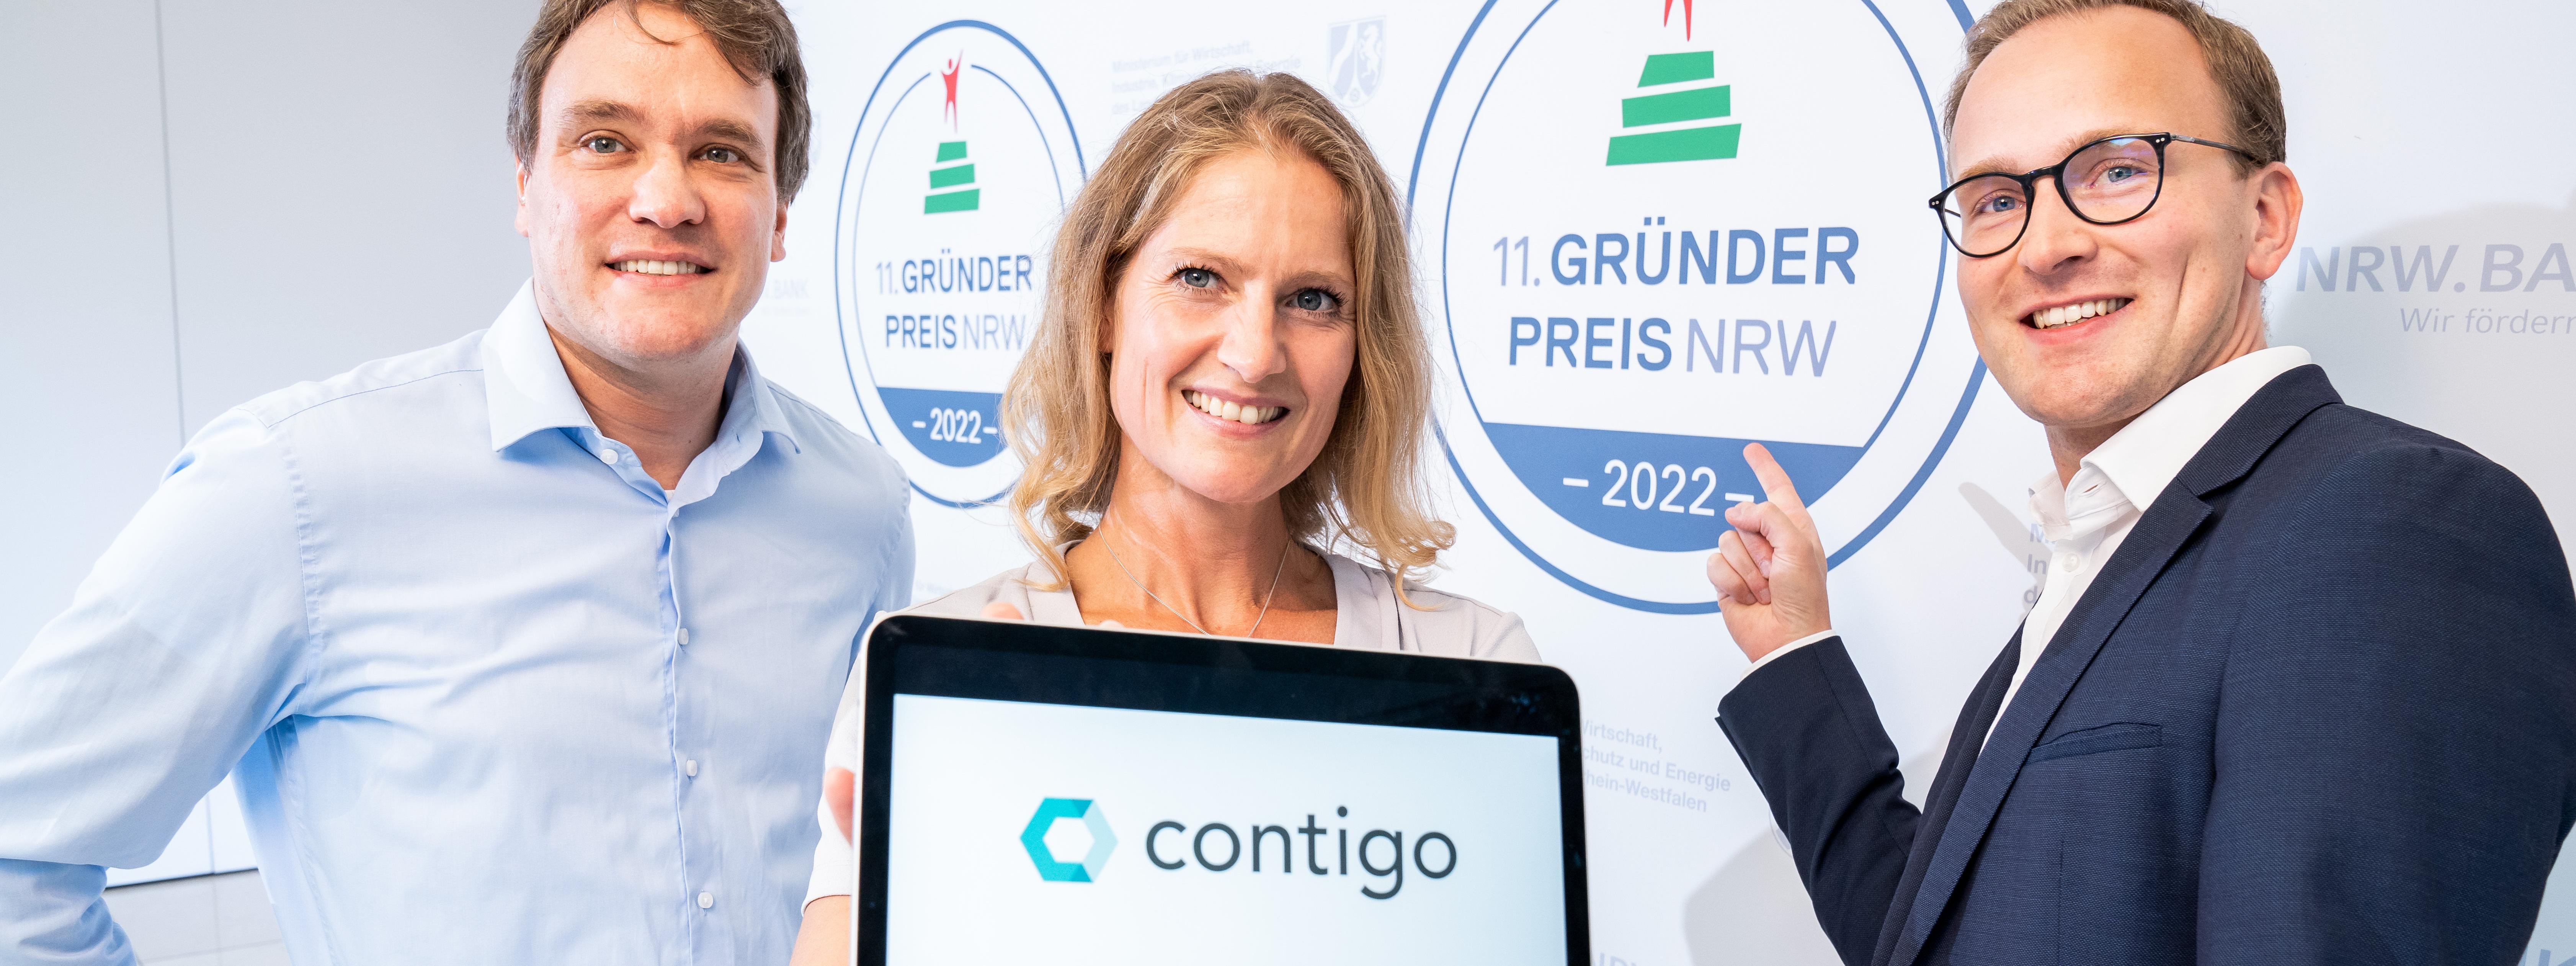 Nicolas Stamer and Sebastian Jansen, between them a woman holding a tablet showing the contigo logo on the display